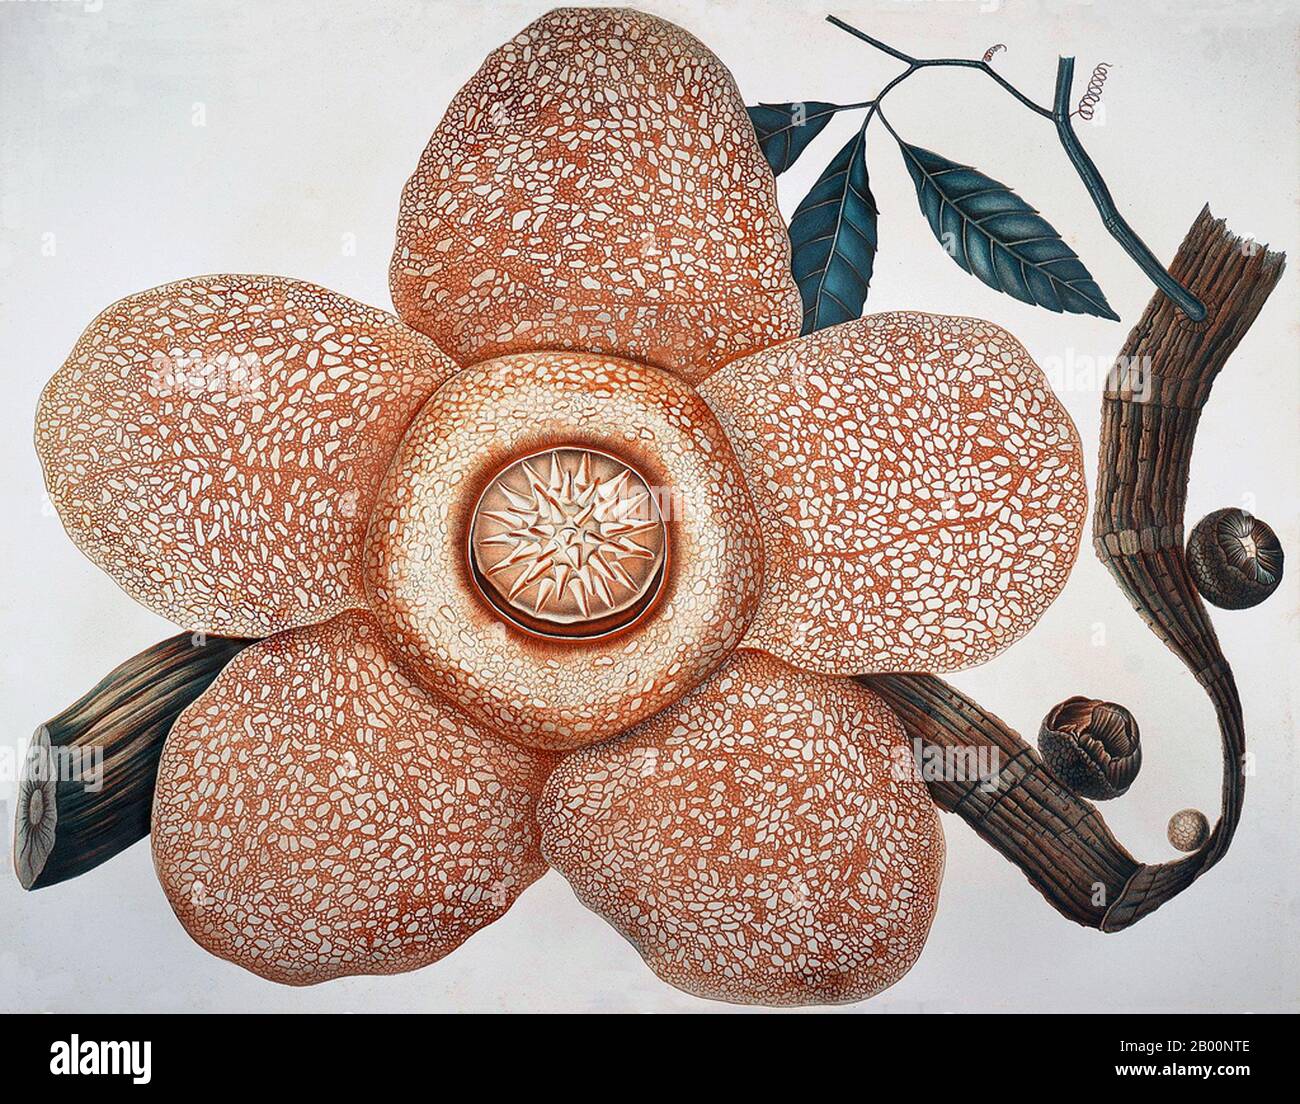 Indonesia: Rafflesia arnoldii produces the largest individual flower of any species in the world. Kota Bogor, Java. Illustration by Friederich AW Miquel, 1863.  Rafflesia arnoldii produces the largest individual flower of any species in the world. But you might not want to get too close to it because it has 'a penetrating smell more repulsive than any buffalo carcass in an advanced stage of decomposition'. Stock Photo